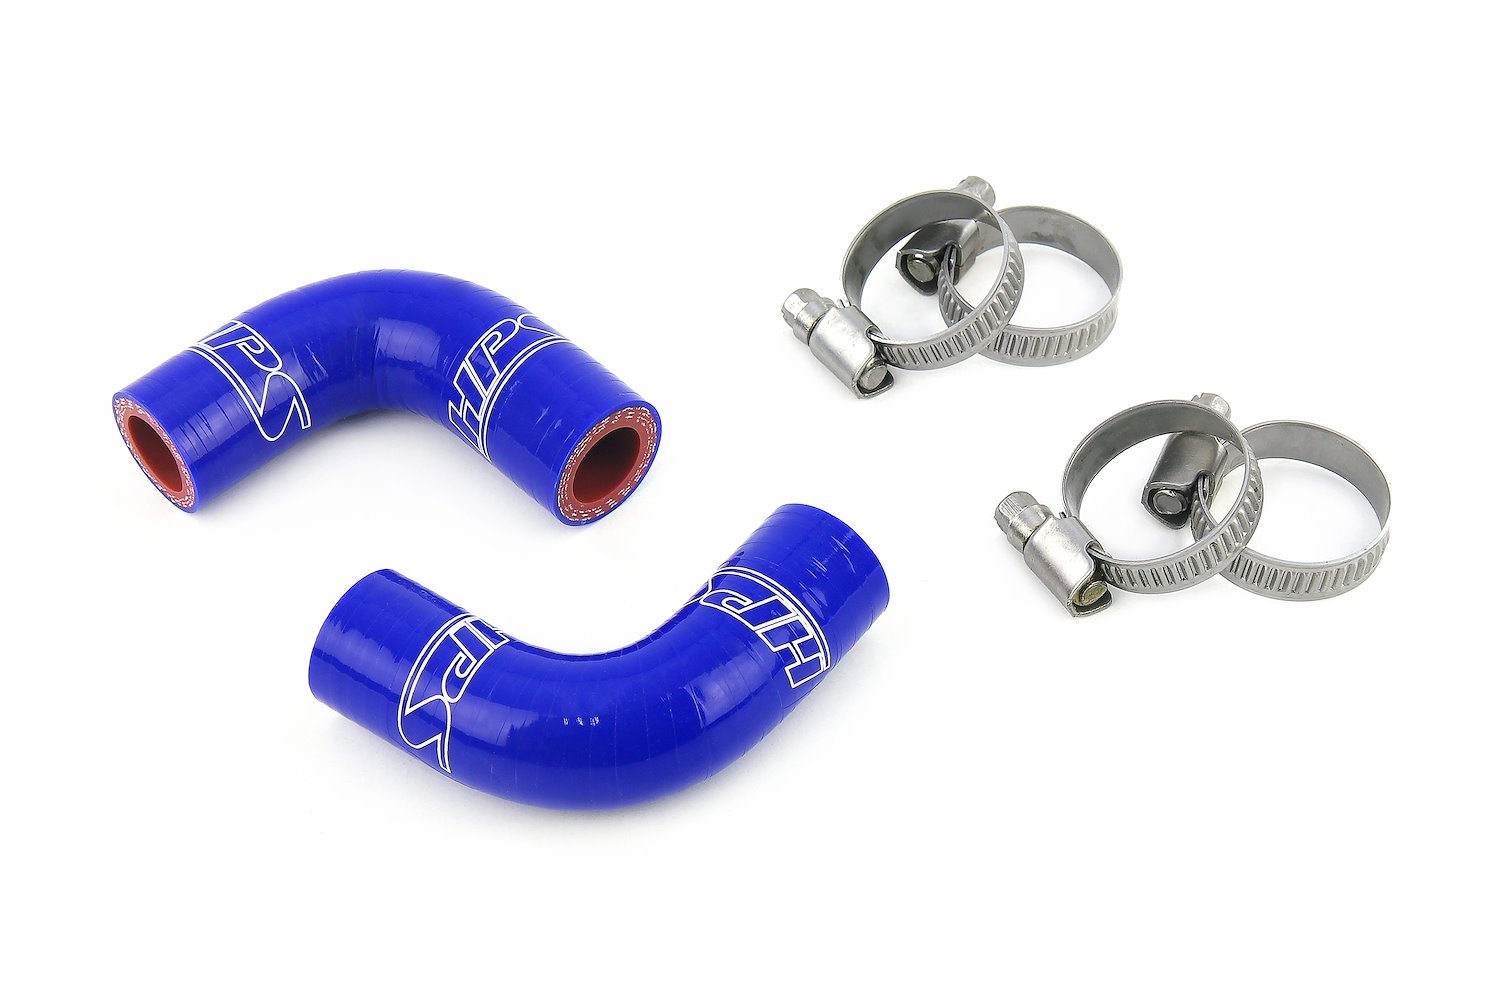 57-2068-BLUE Silicone Coolant Hose Kit, 3-Ply Reinforced Silicone, Replaces Rubber Heater & Transmission Coolant Hoses